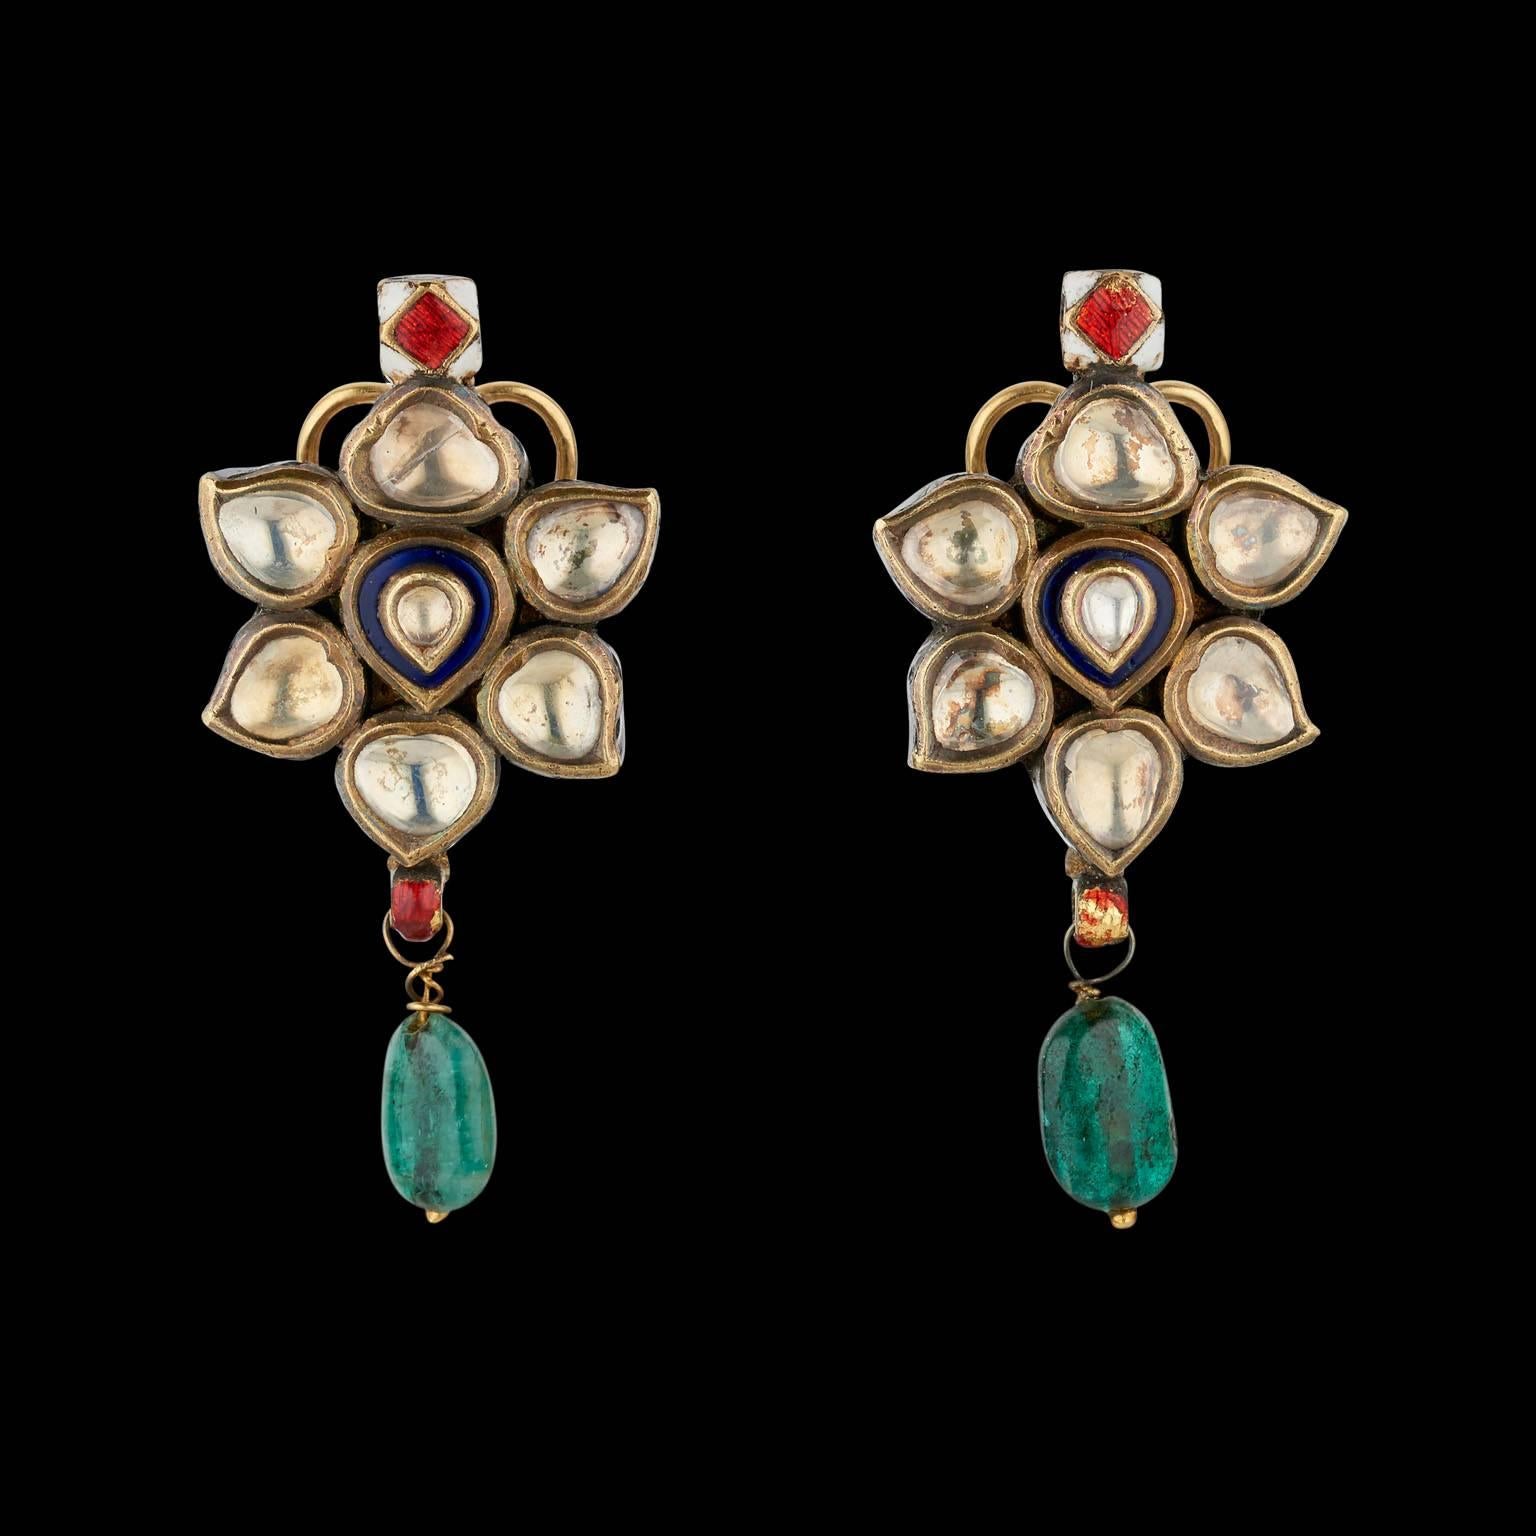 A Pair of Earrings
Rajasthan, North India
19th Century

Fabricated from gold, set in kundan (traditional pure gold setting) technique with white sapphires, each suspended with an emerald bead. The reverse is enamelled.
